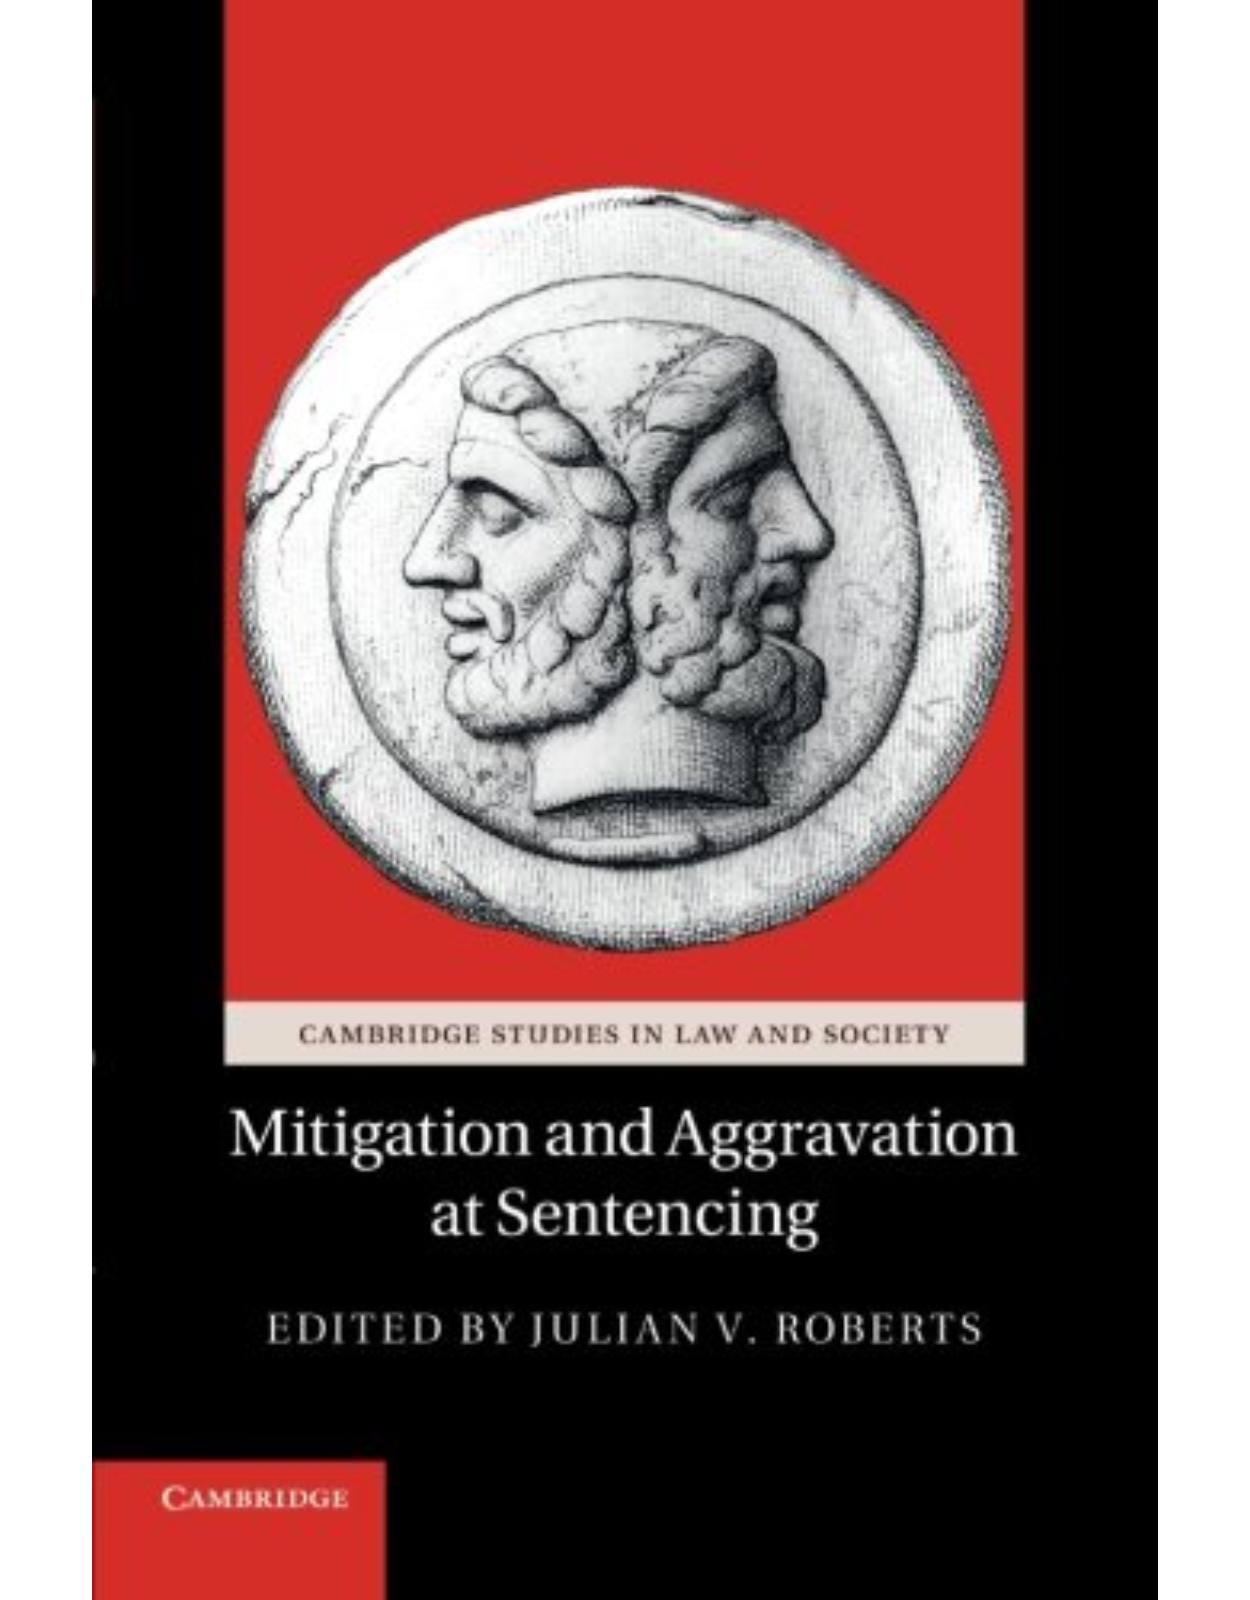 Mitigation and Aggravation at Sentencing (Cambridge Studies in Law and Society)